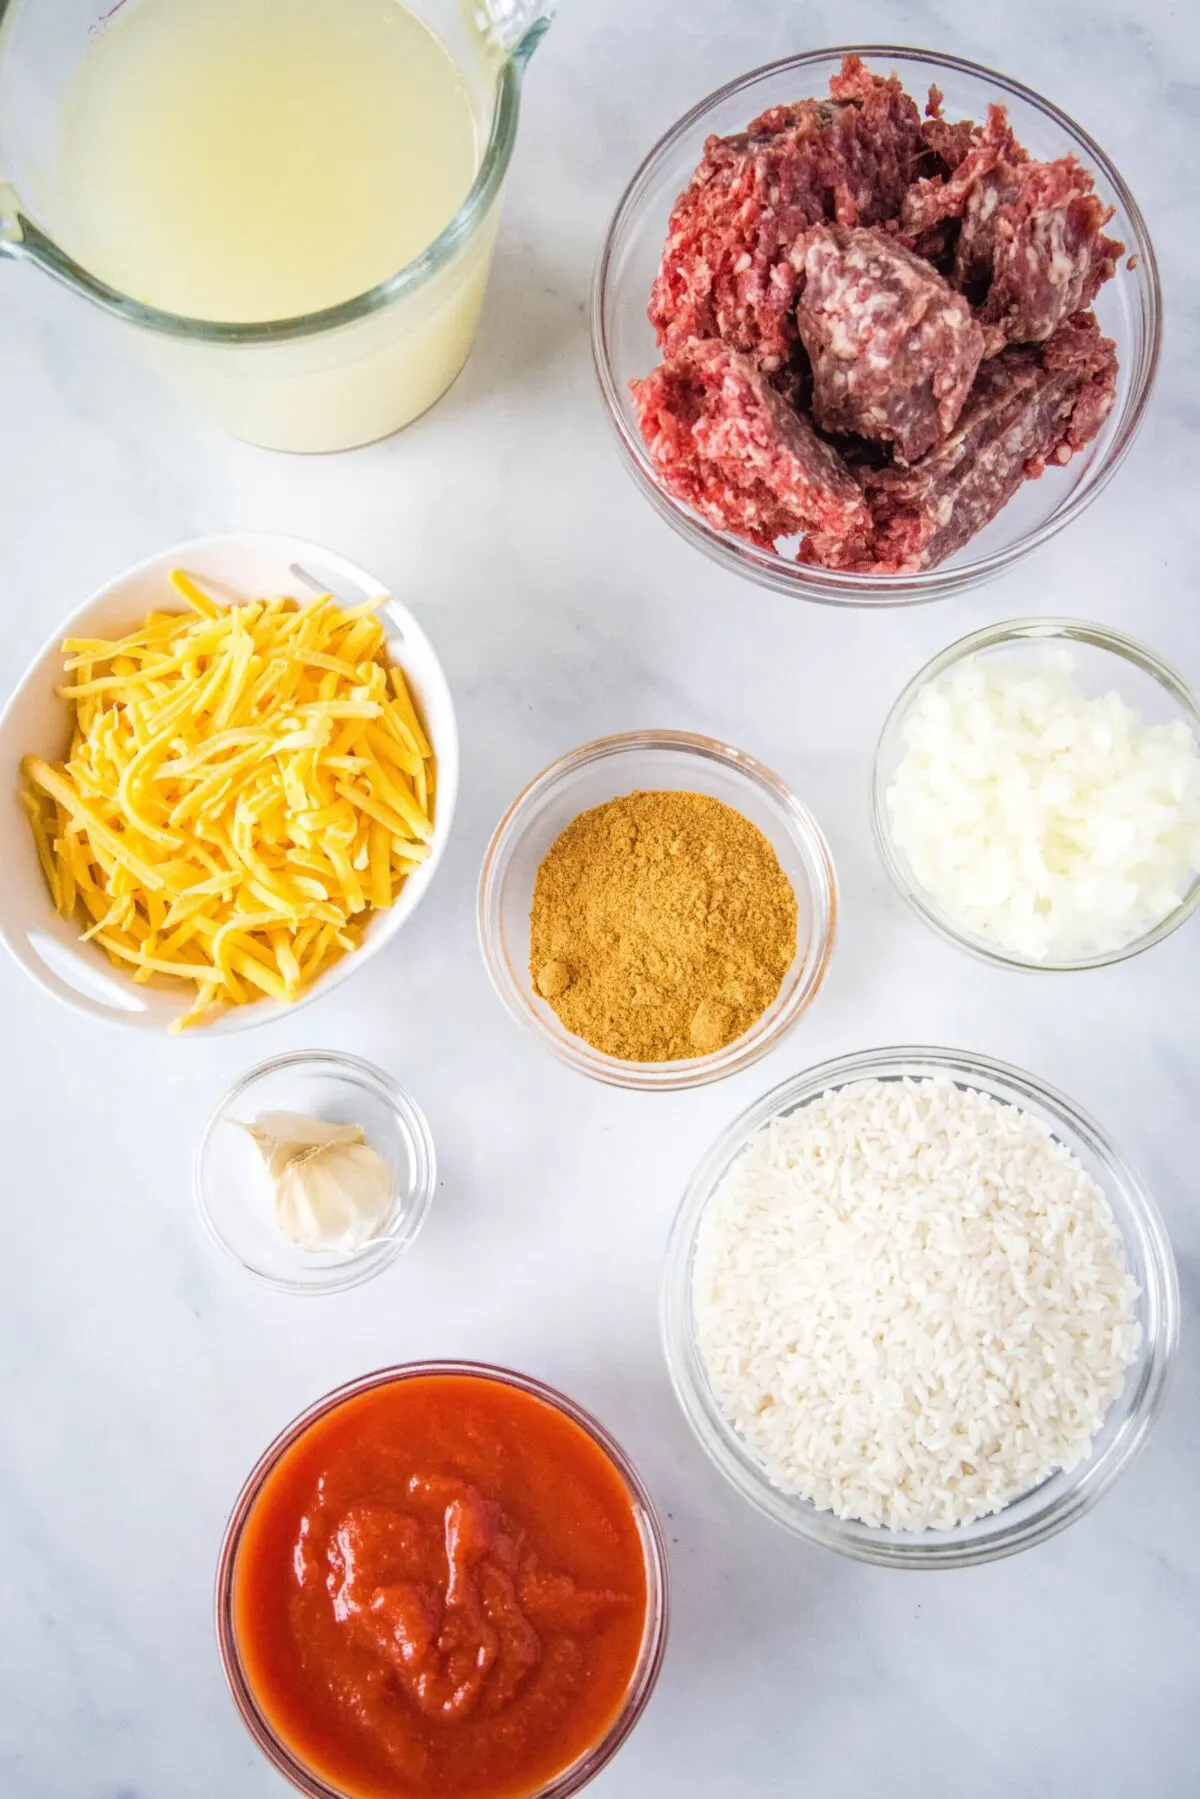 Overhead view of the ingredients needed for taco rice: a bowl of raw ground beef, a bowl of shredded cheddar cheese, a bowl of rice, a bowl of taco seasoning, a bowl of diced onions, a bowl of garlic, a bowl of tomato sauce, and a pitcher of chicken broth